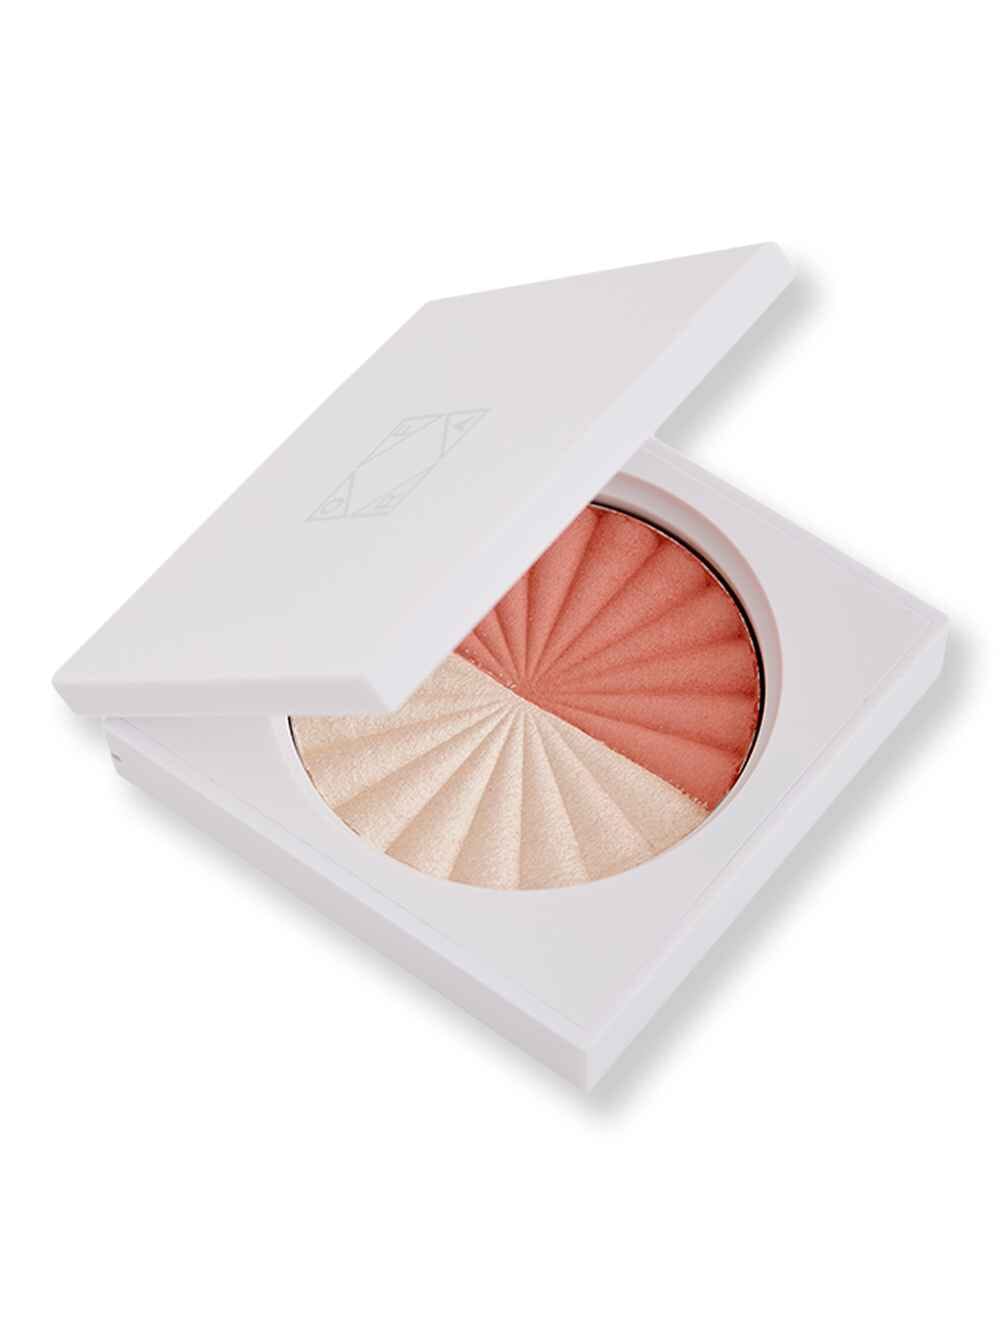 OFRA Cosmetics OFRA Cosmetics Snuggle Up Duo 10 g Blushes & Bronzers 